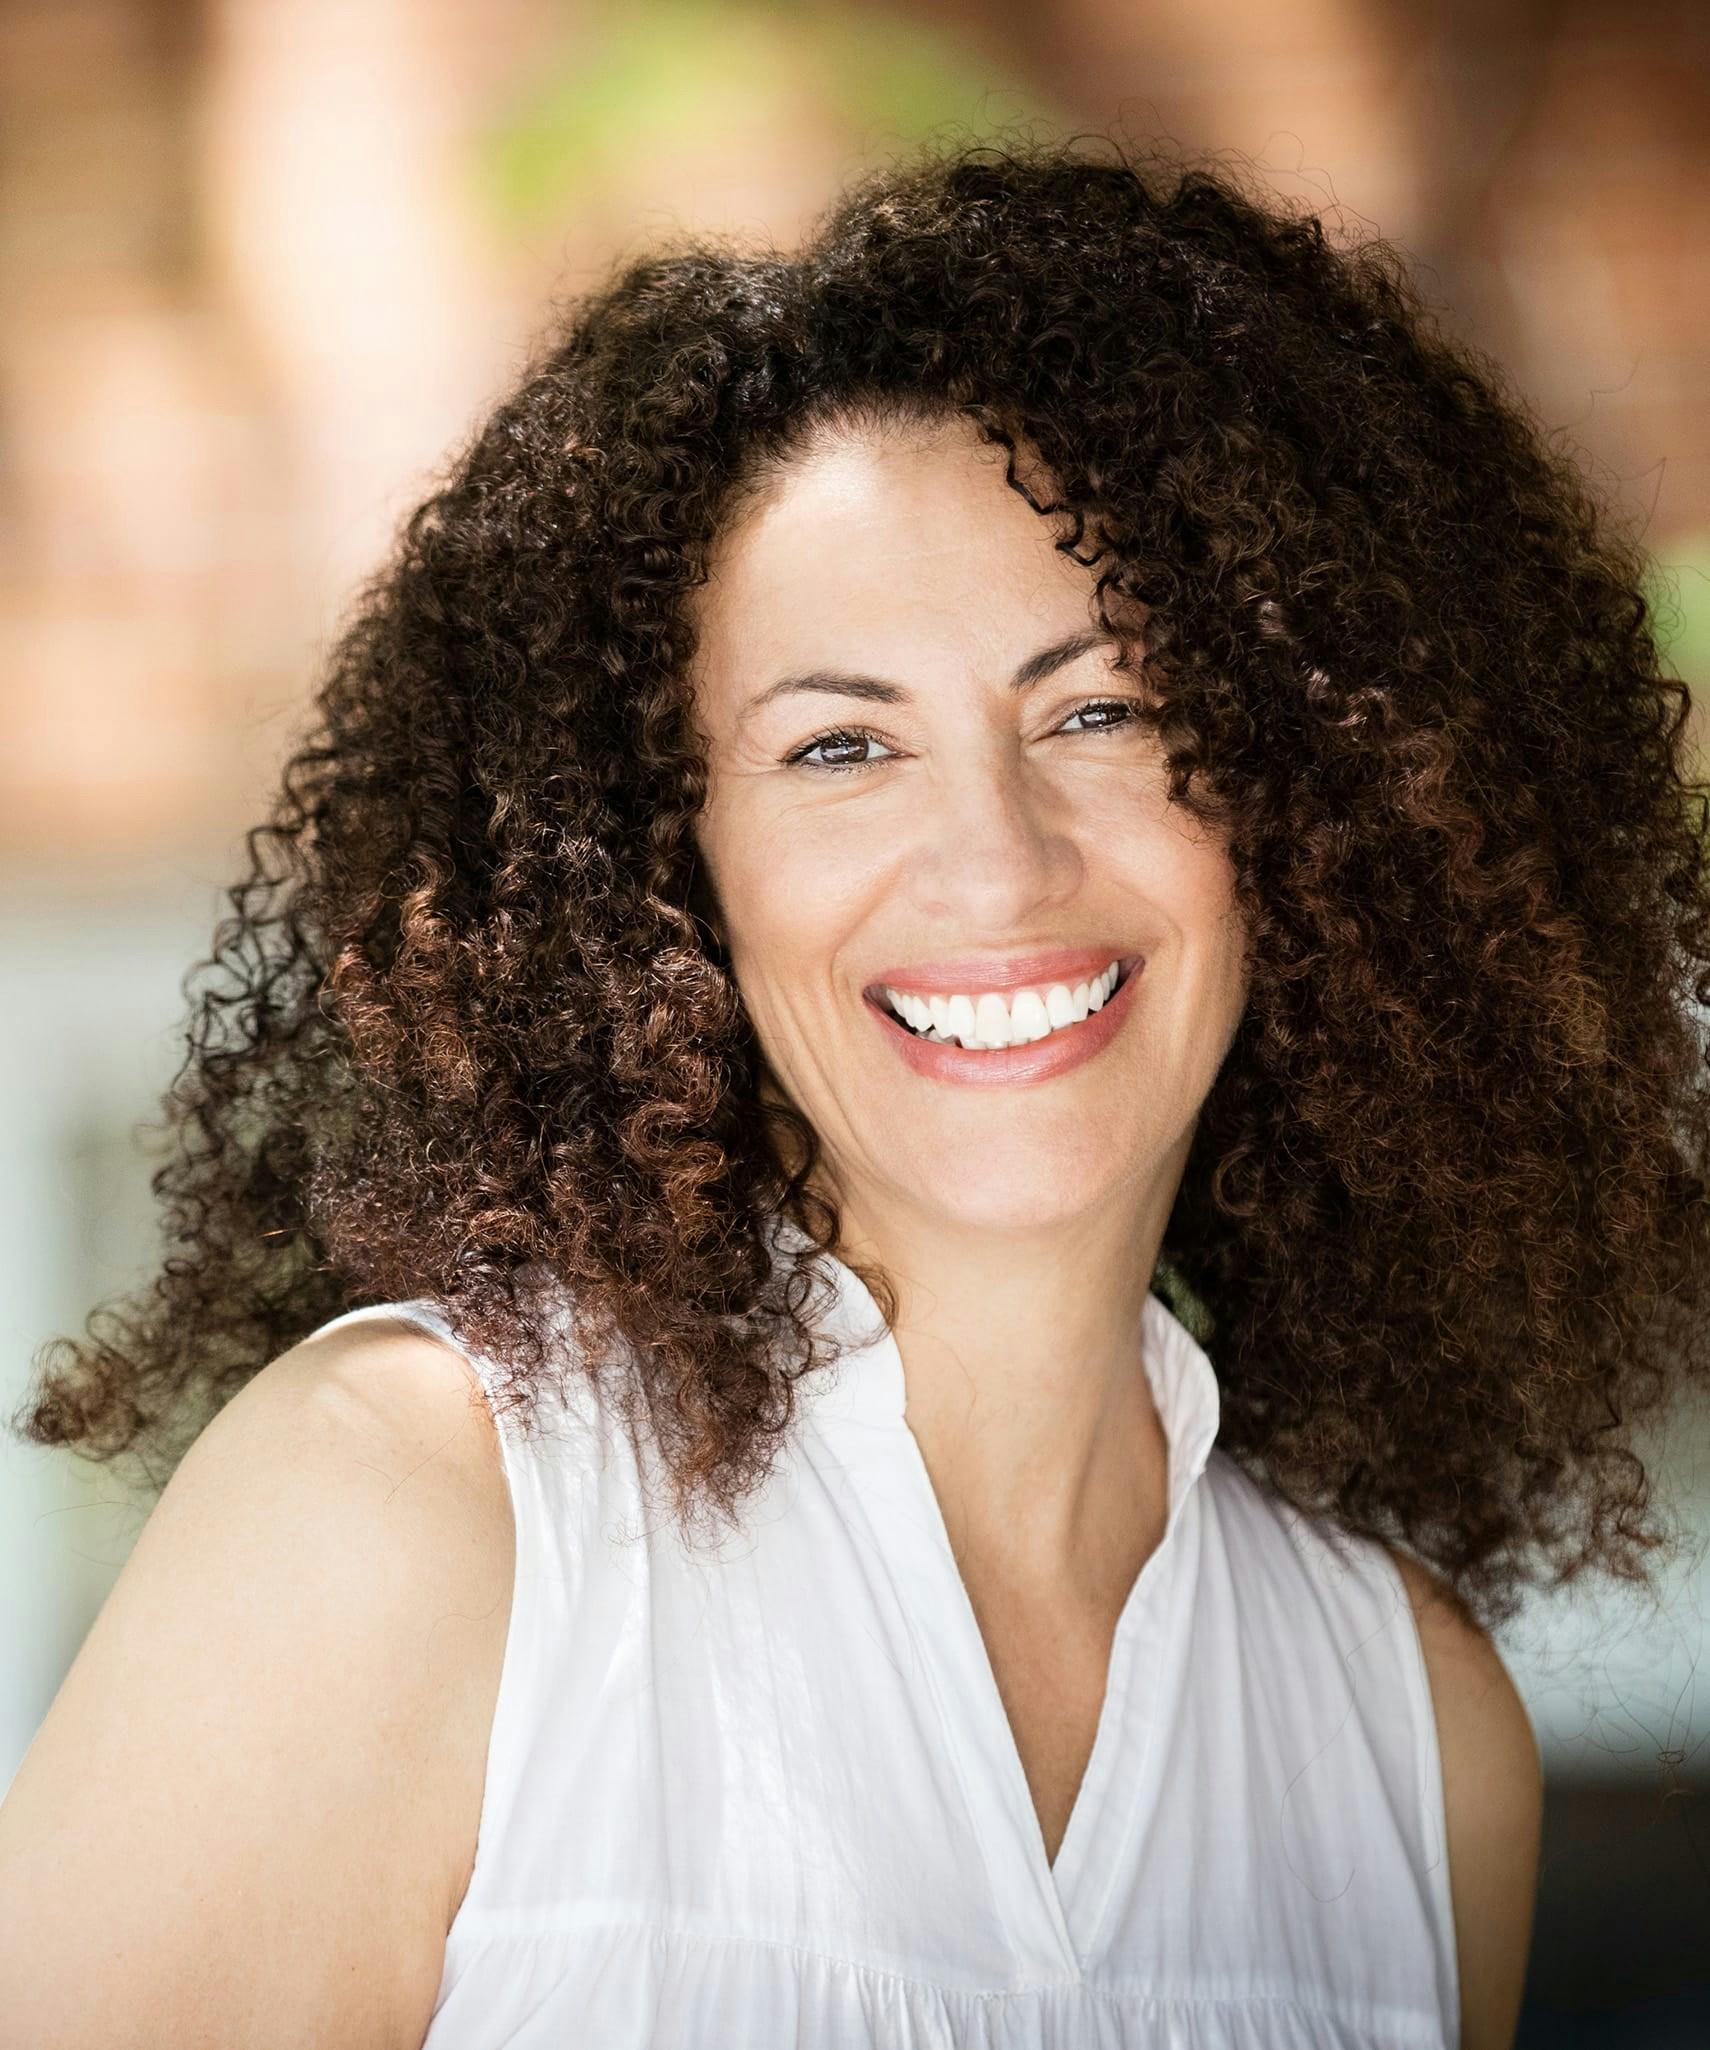 Woman with curly hair wearing white blouse